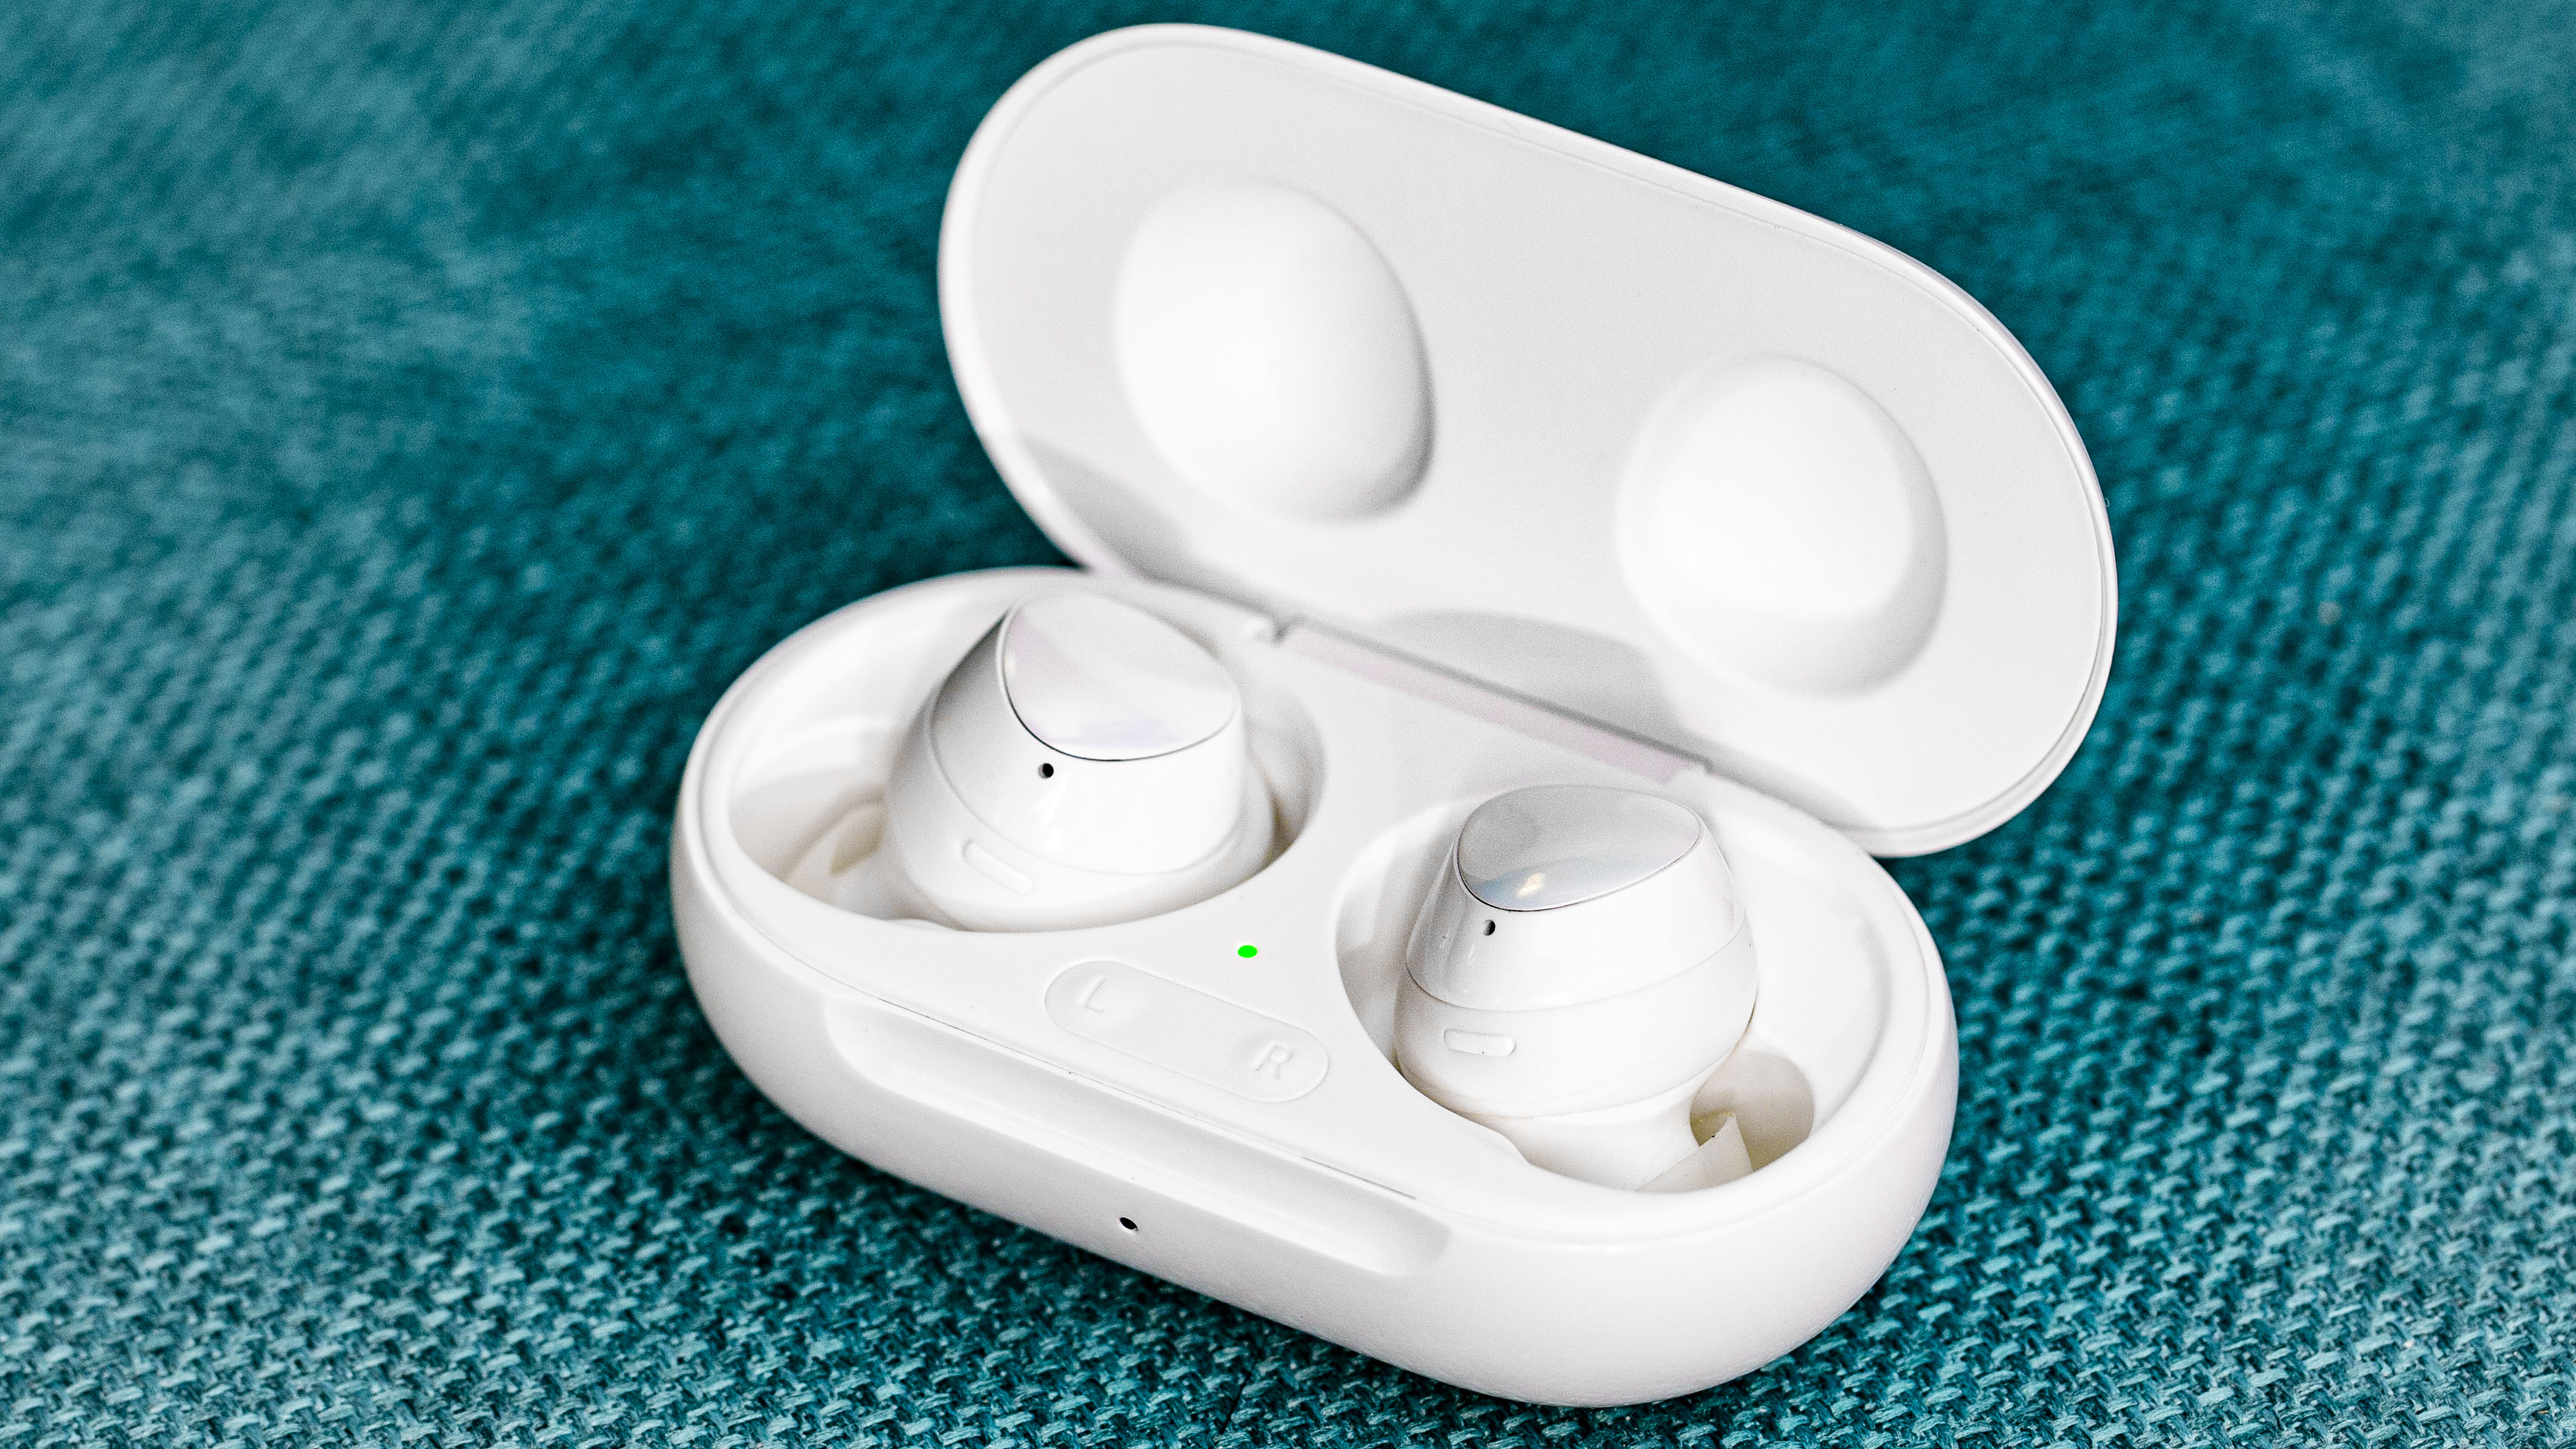 Samsung Galaxy Buds+ review: more battery, better sound | AndroidPIT